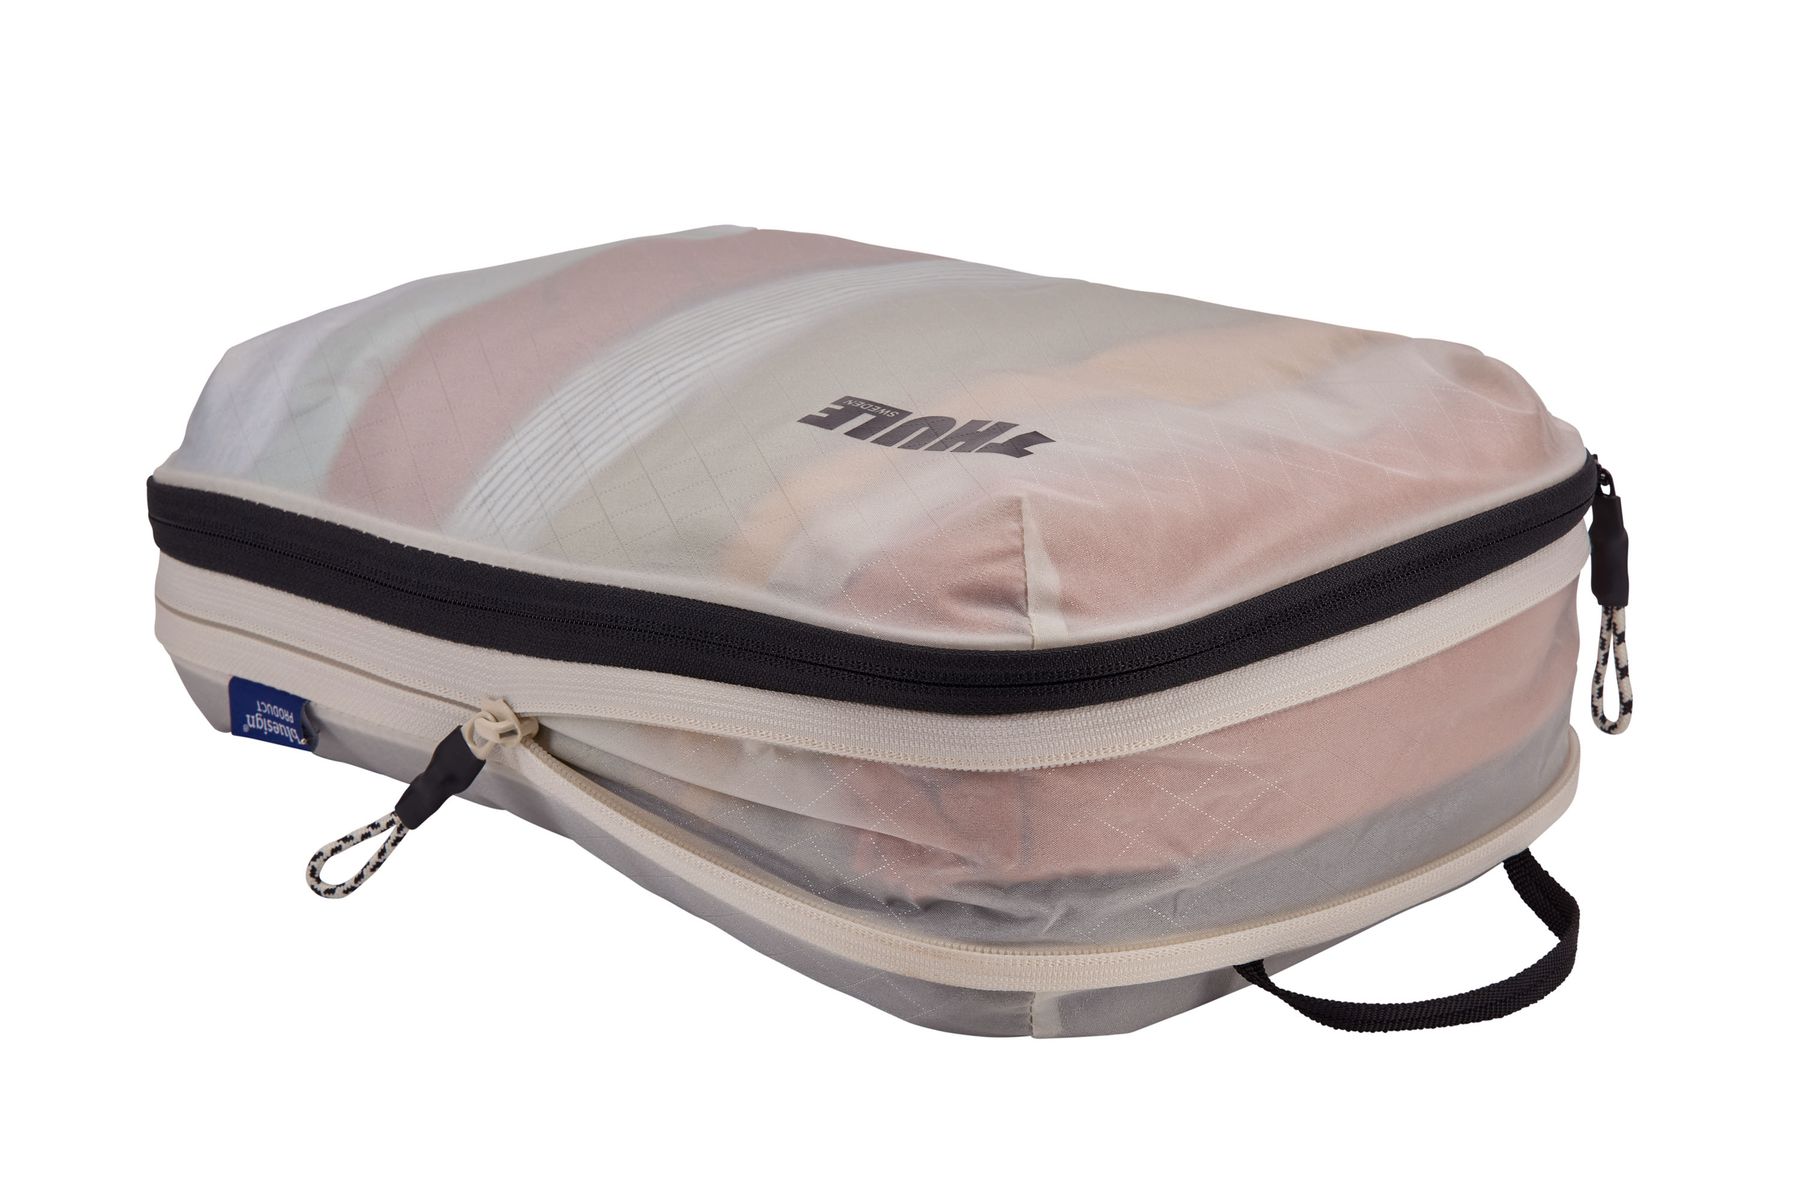 Thule Compression Packing Cube Medium